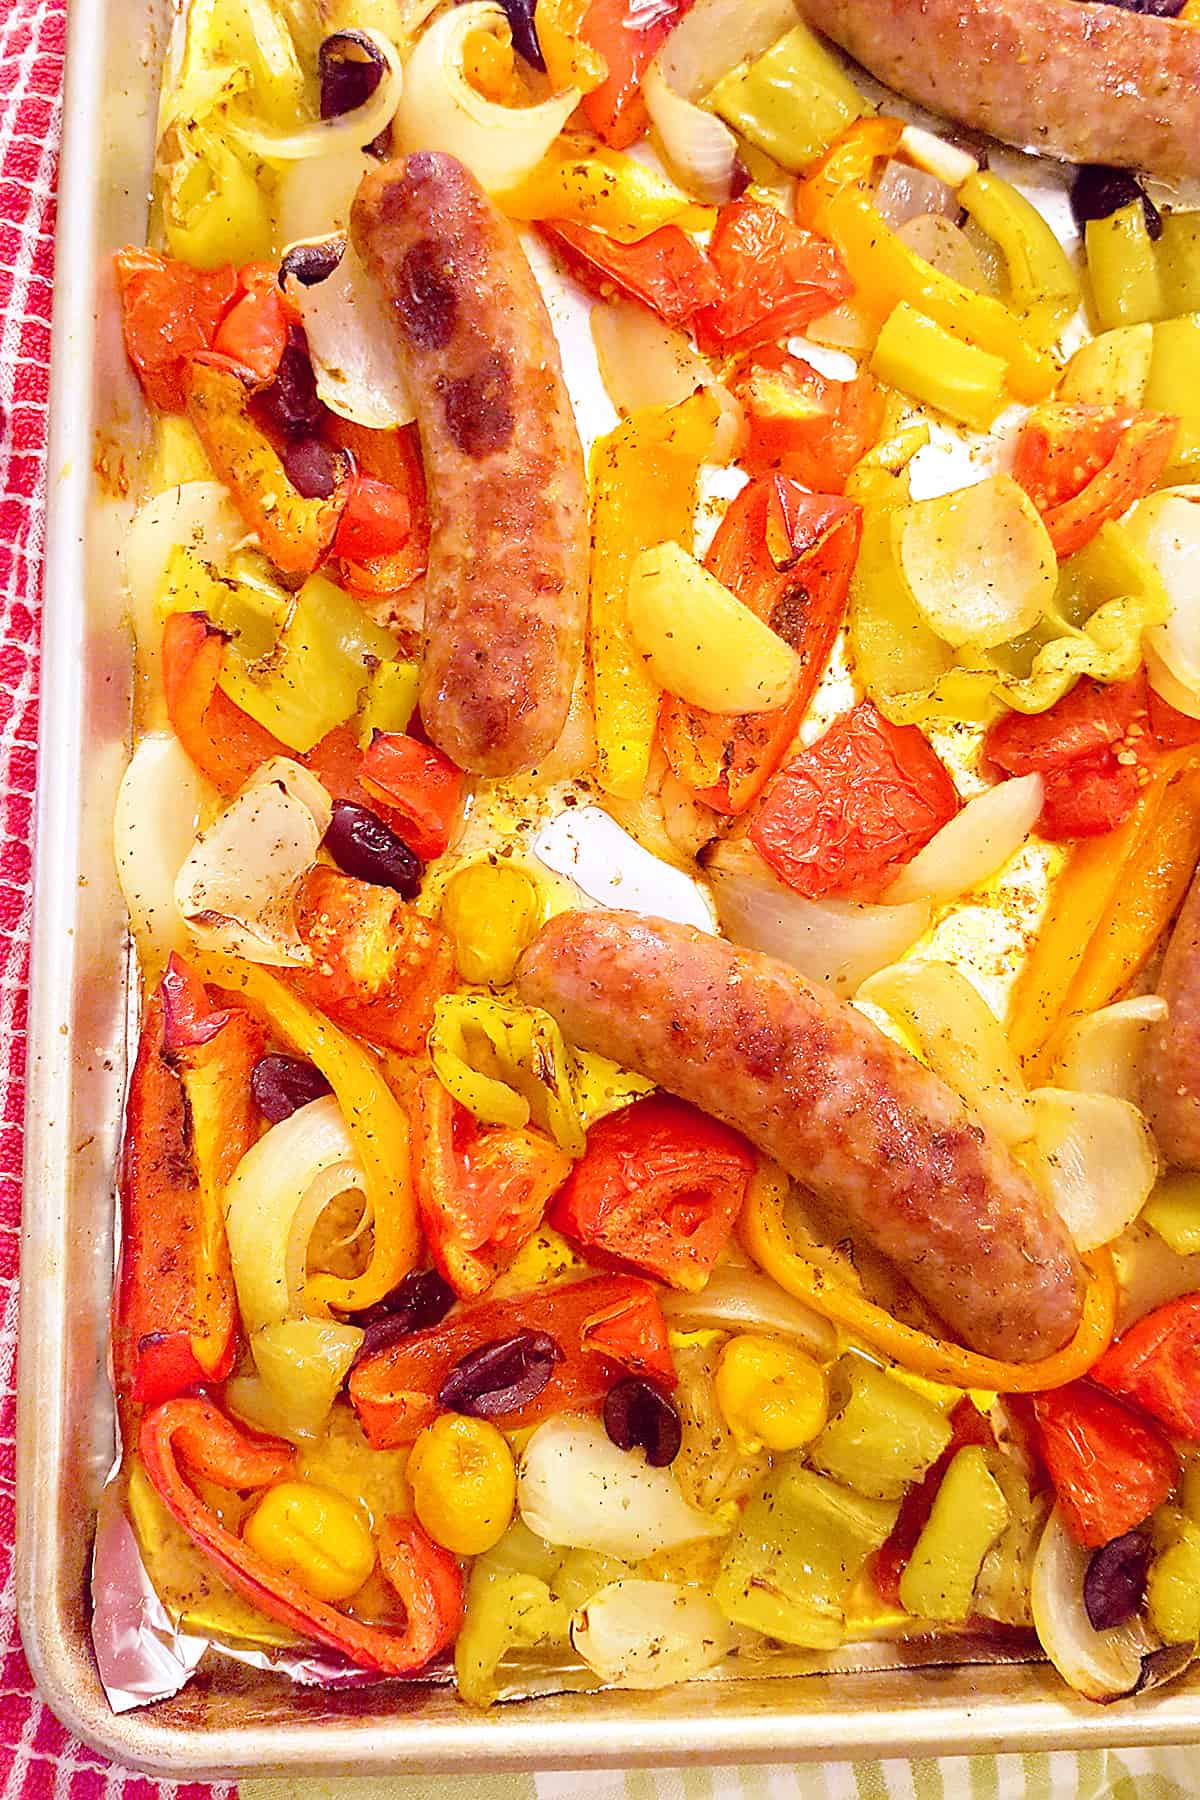 Sheet pan with veggies and sausages after cooking.